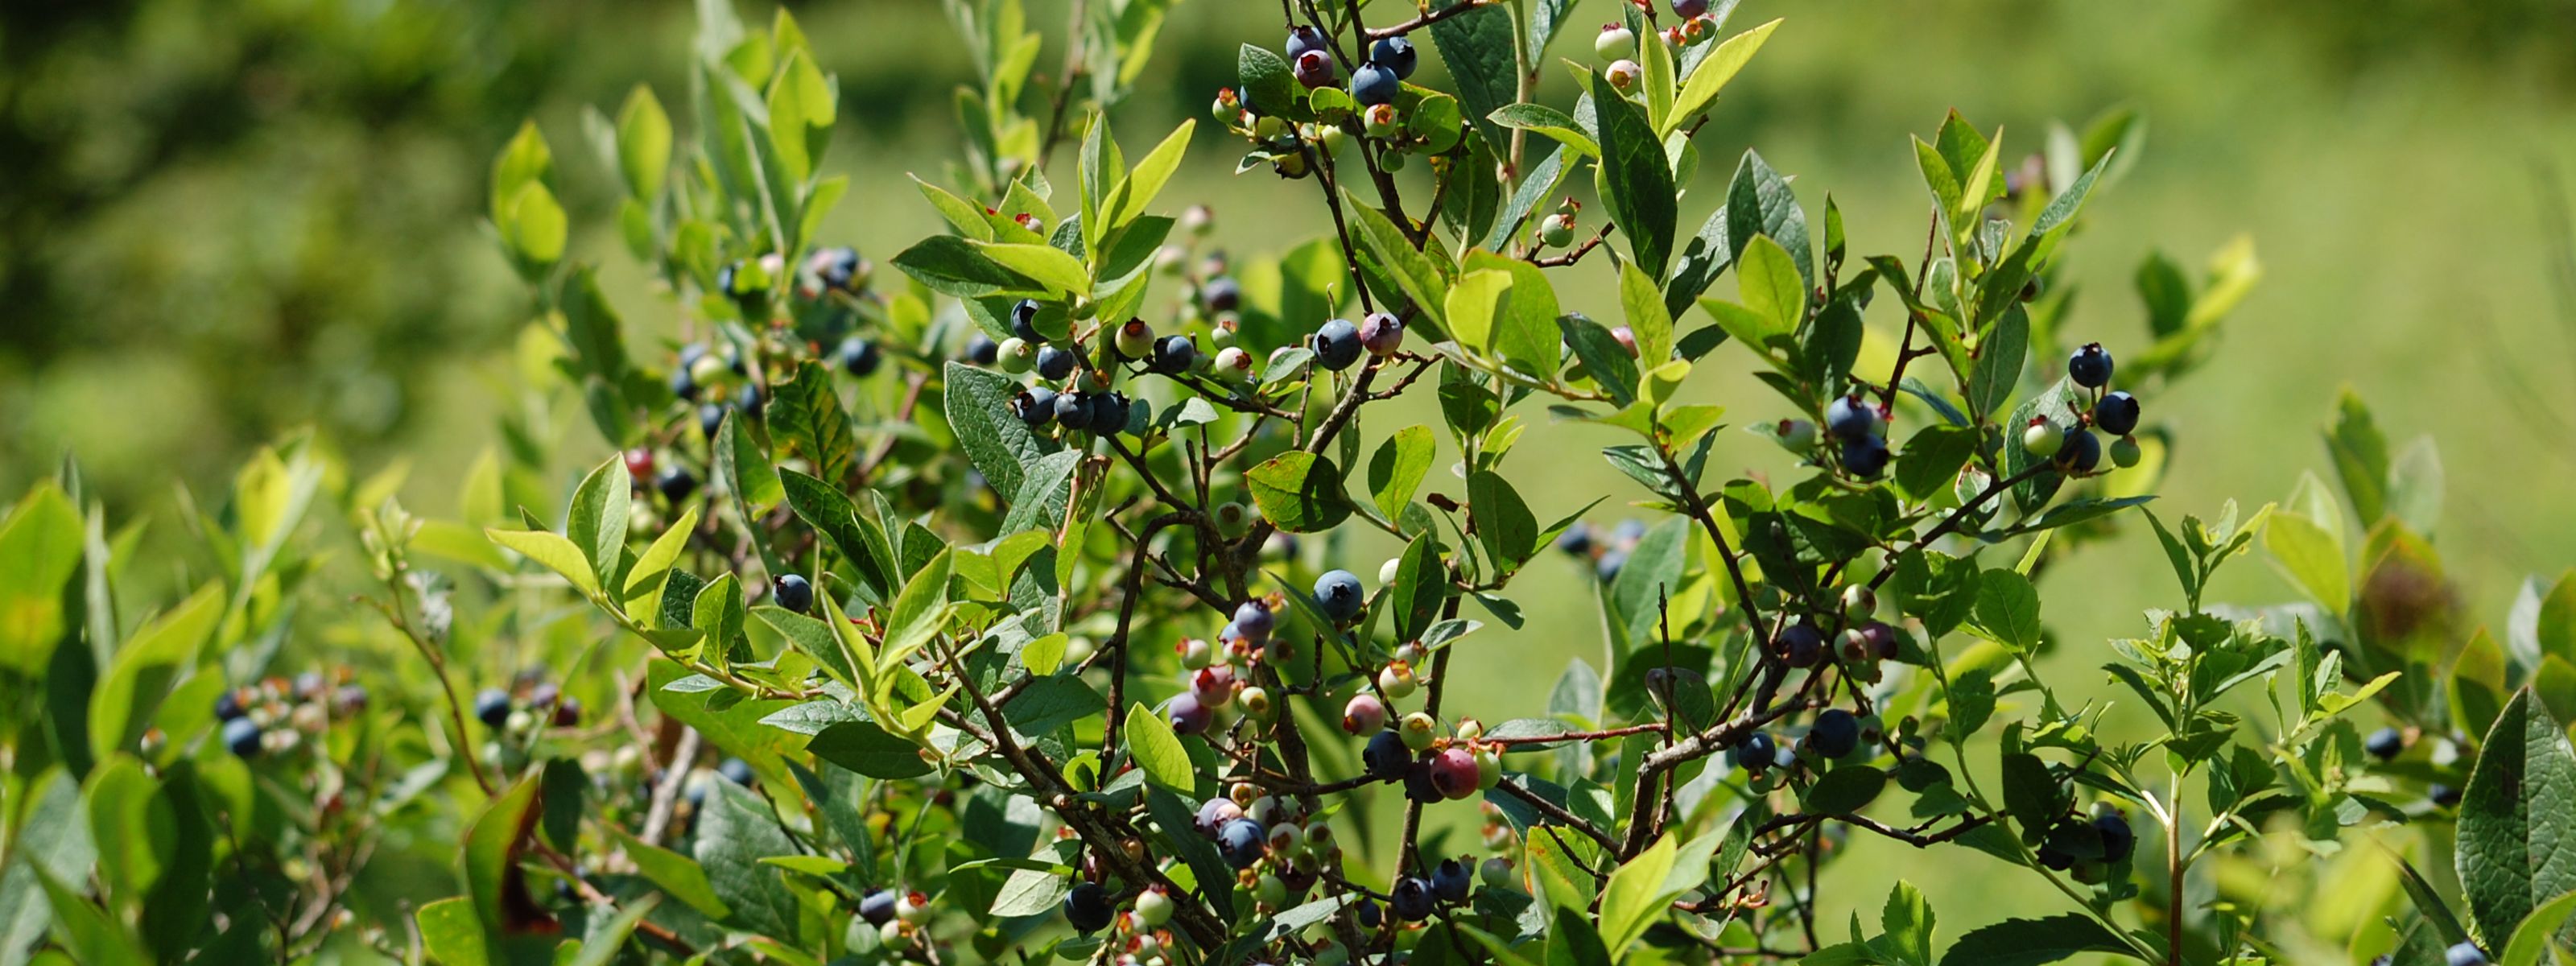 A bush with green leaves and small round blueberries.